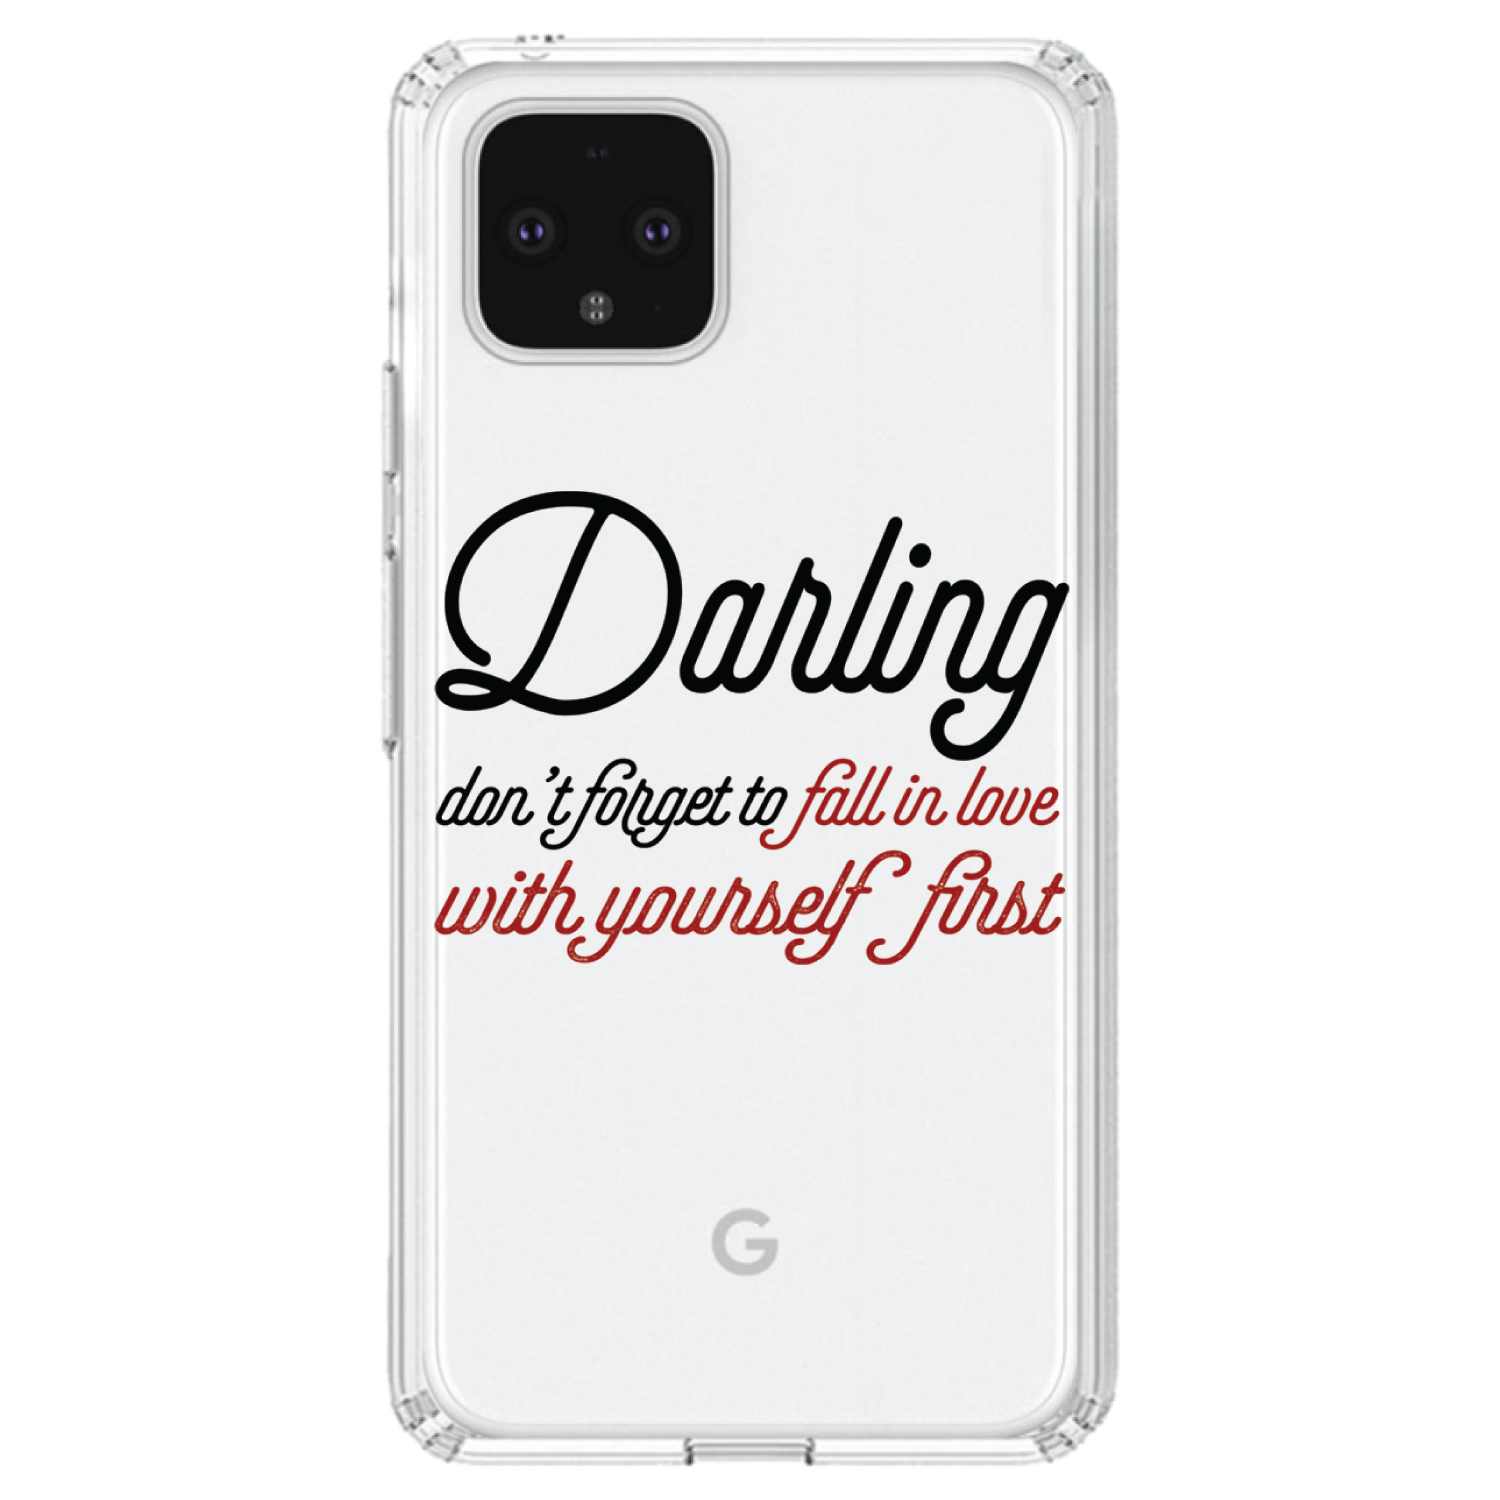 DistinctInk Clear Shockproof Hybrid Case for Google Pixel 4 (6.1" Screen) - TPU Bumper Acrylic Back Tempered Glass Screen Protector - Darling Don't Forget to Fall In Love with Yourself - image 1 of 1